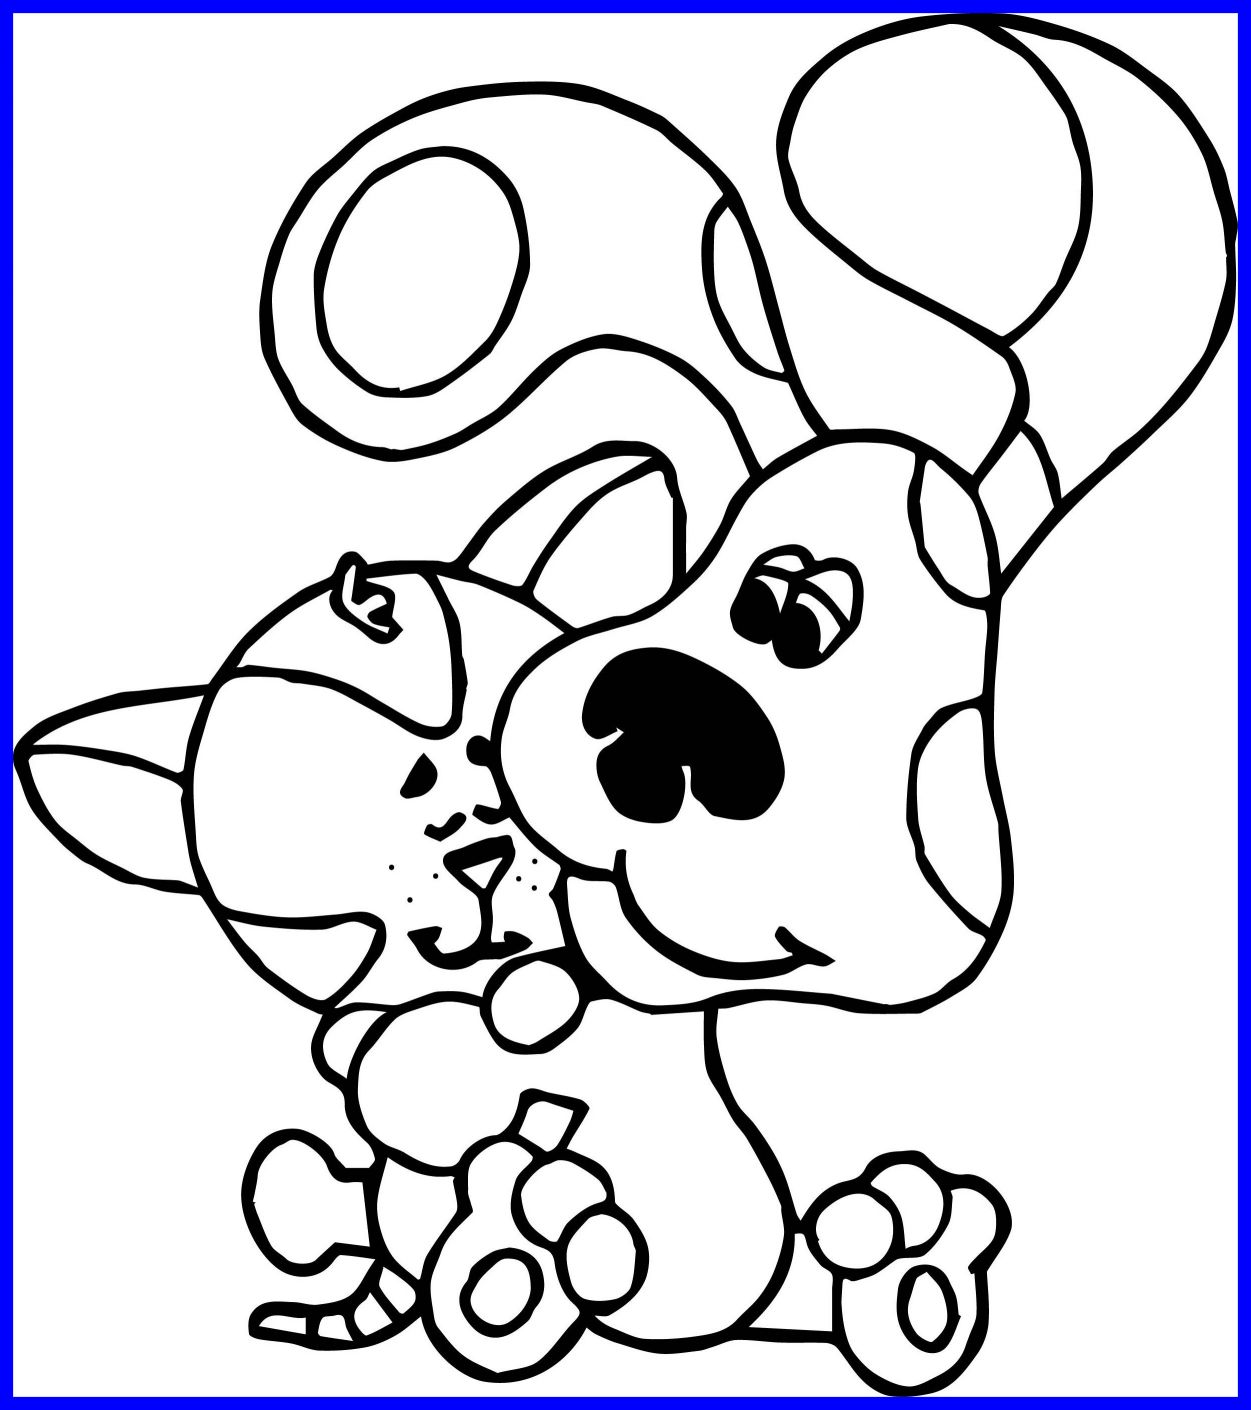 Dog Paw Coloring Page at GetColoringscom Free printable